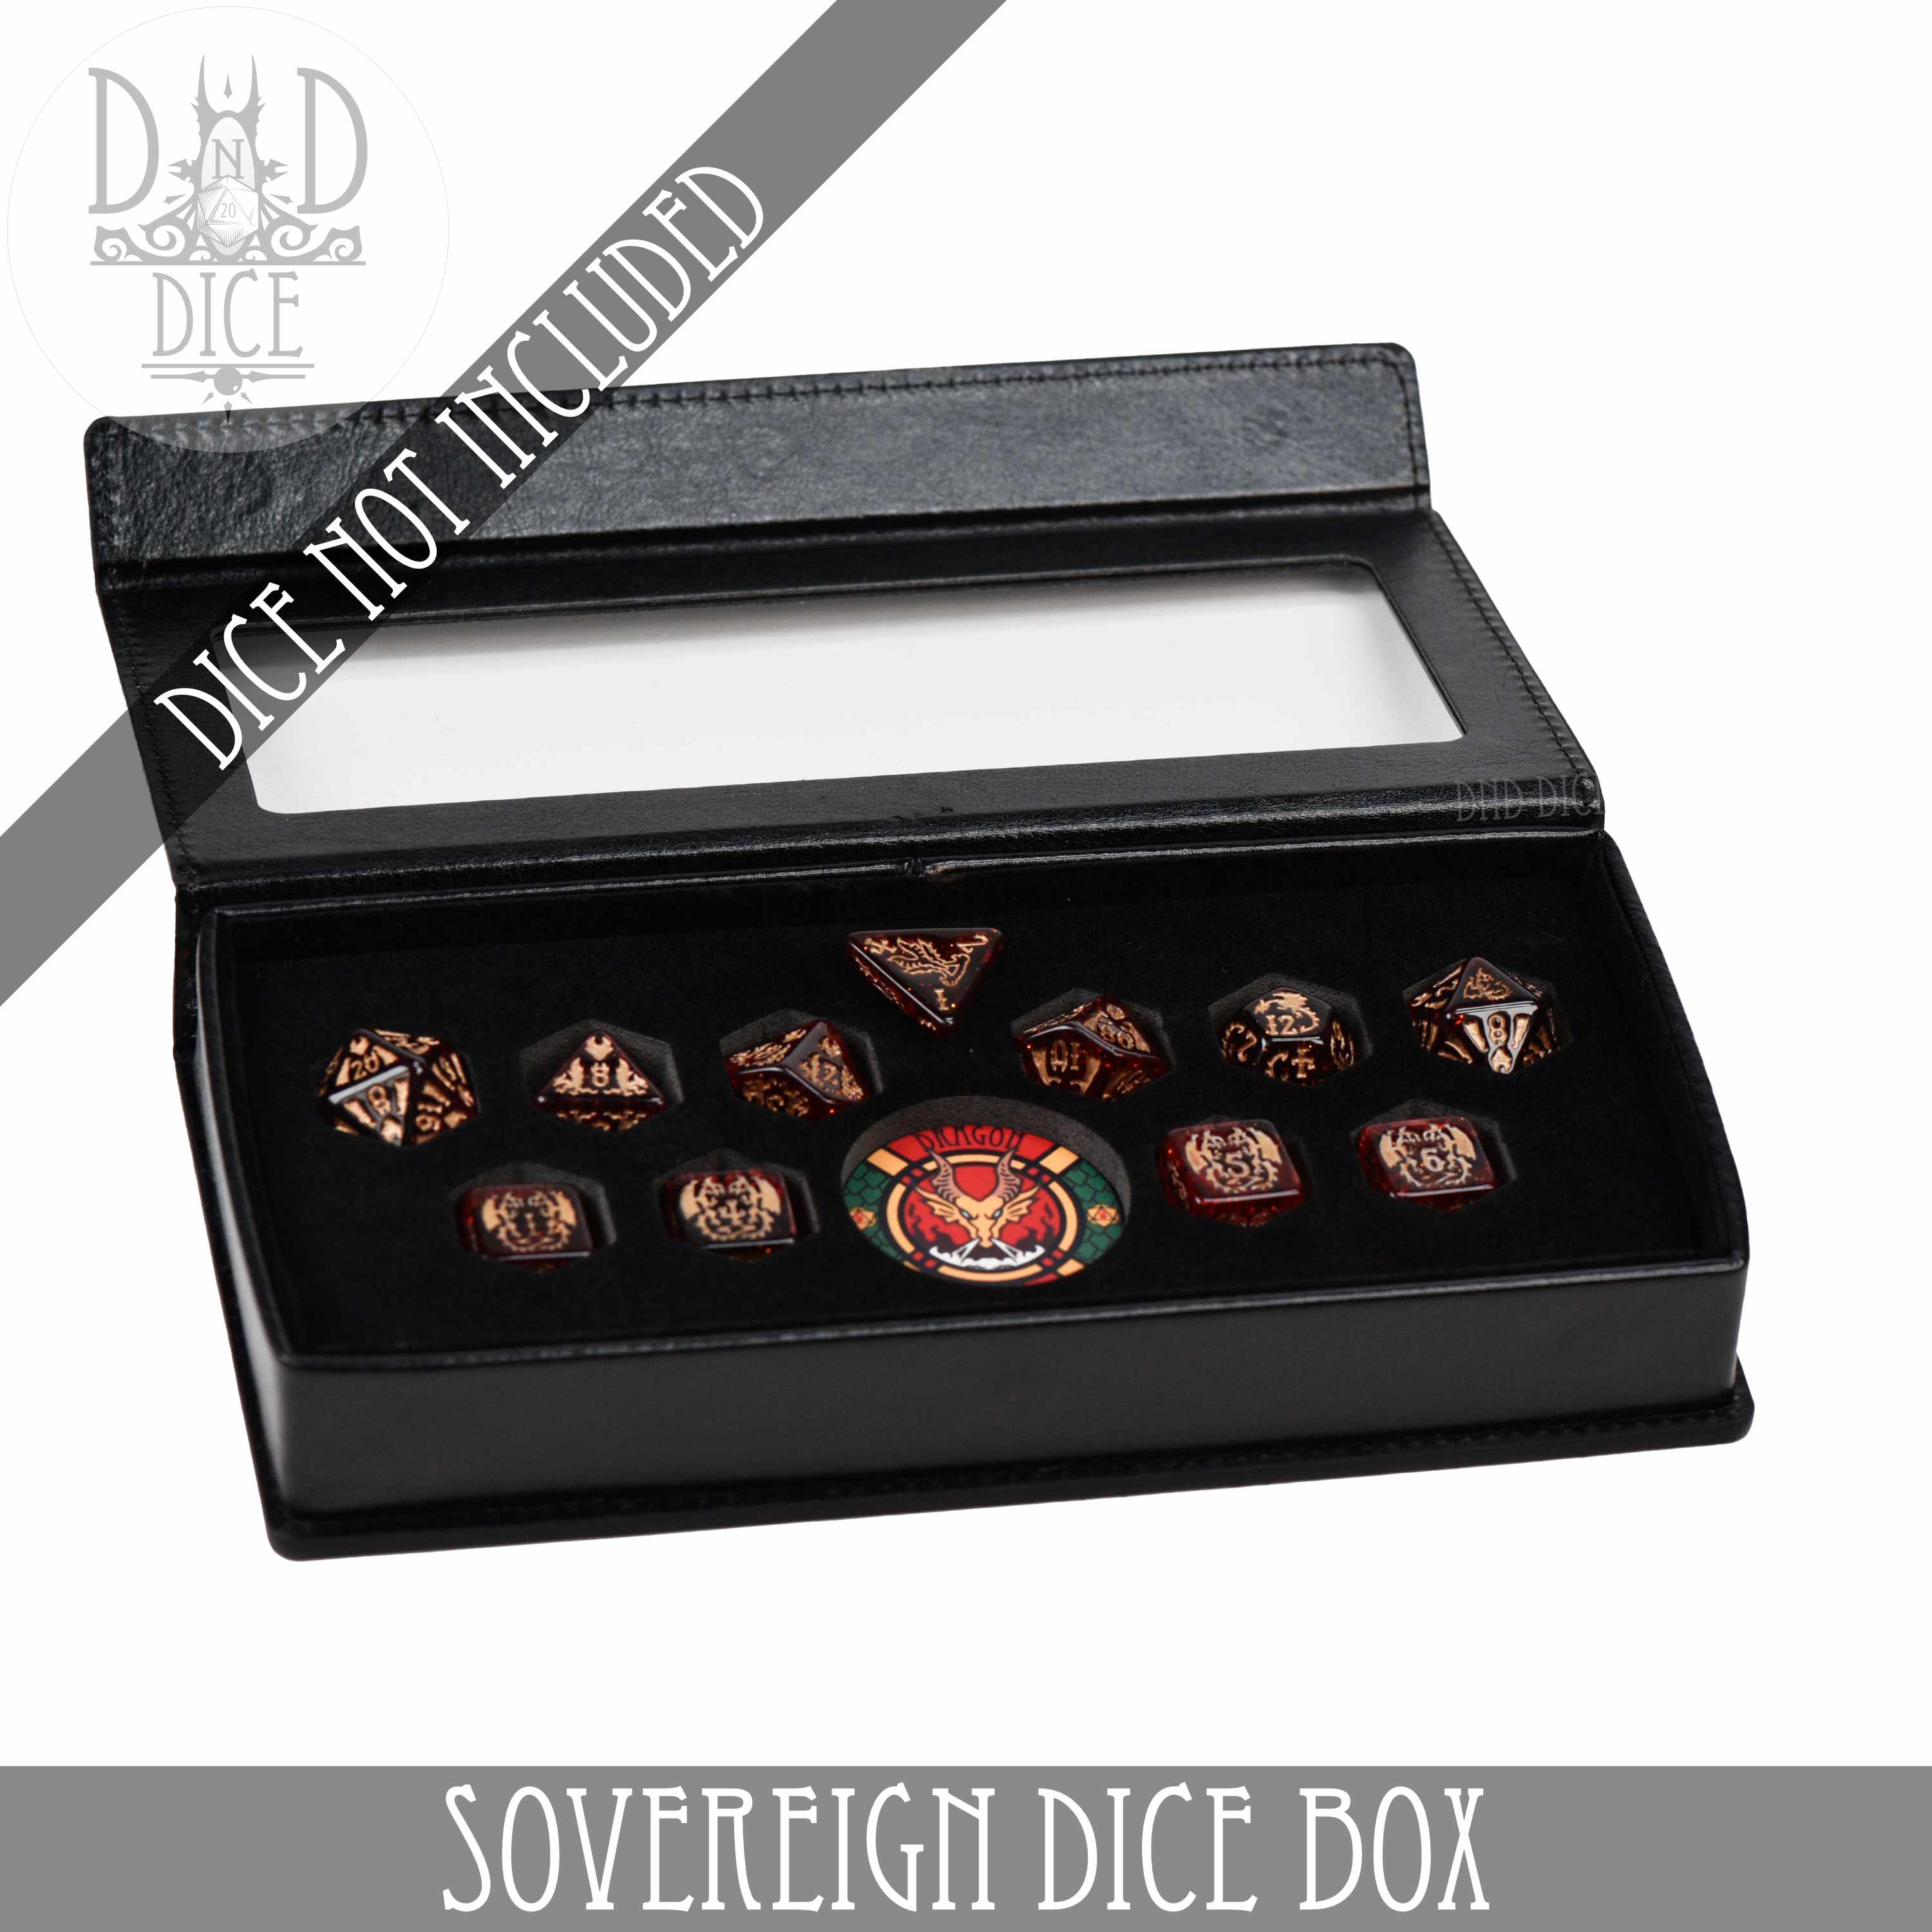 Sovereign Gift Box Packaging - 11 Dice Set